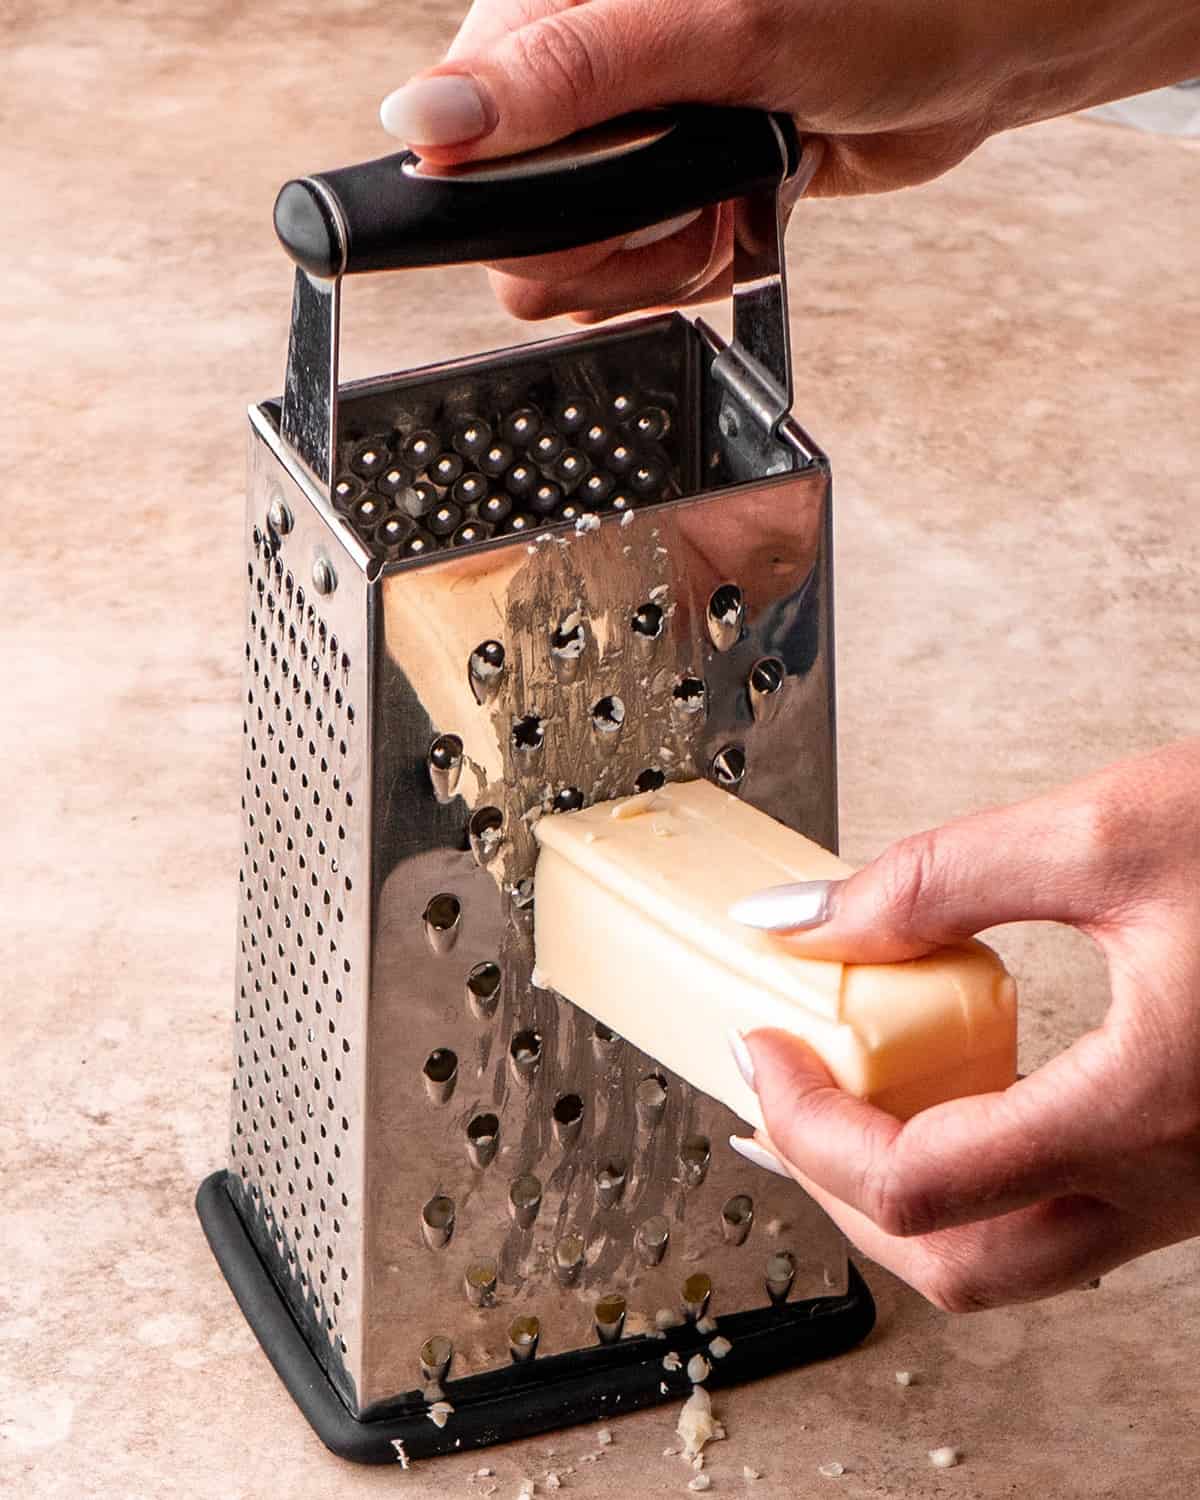 butter being grated with a box grater